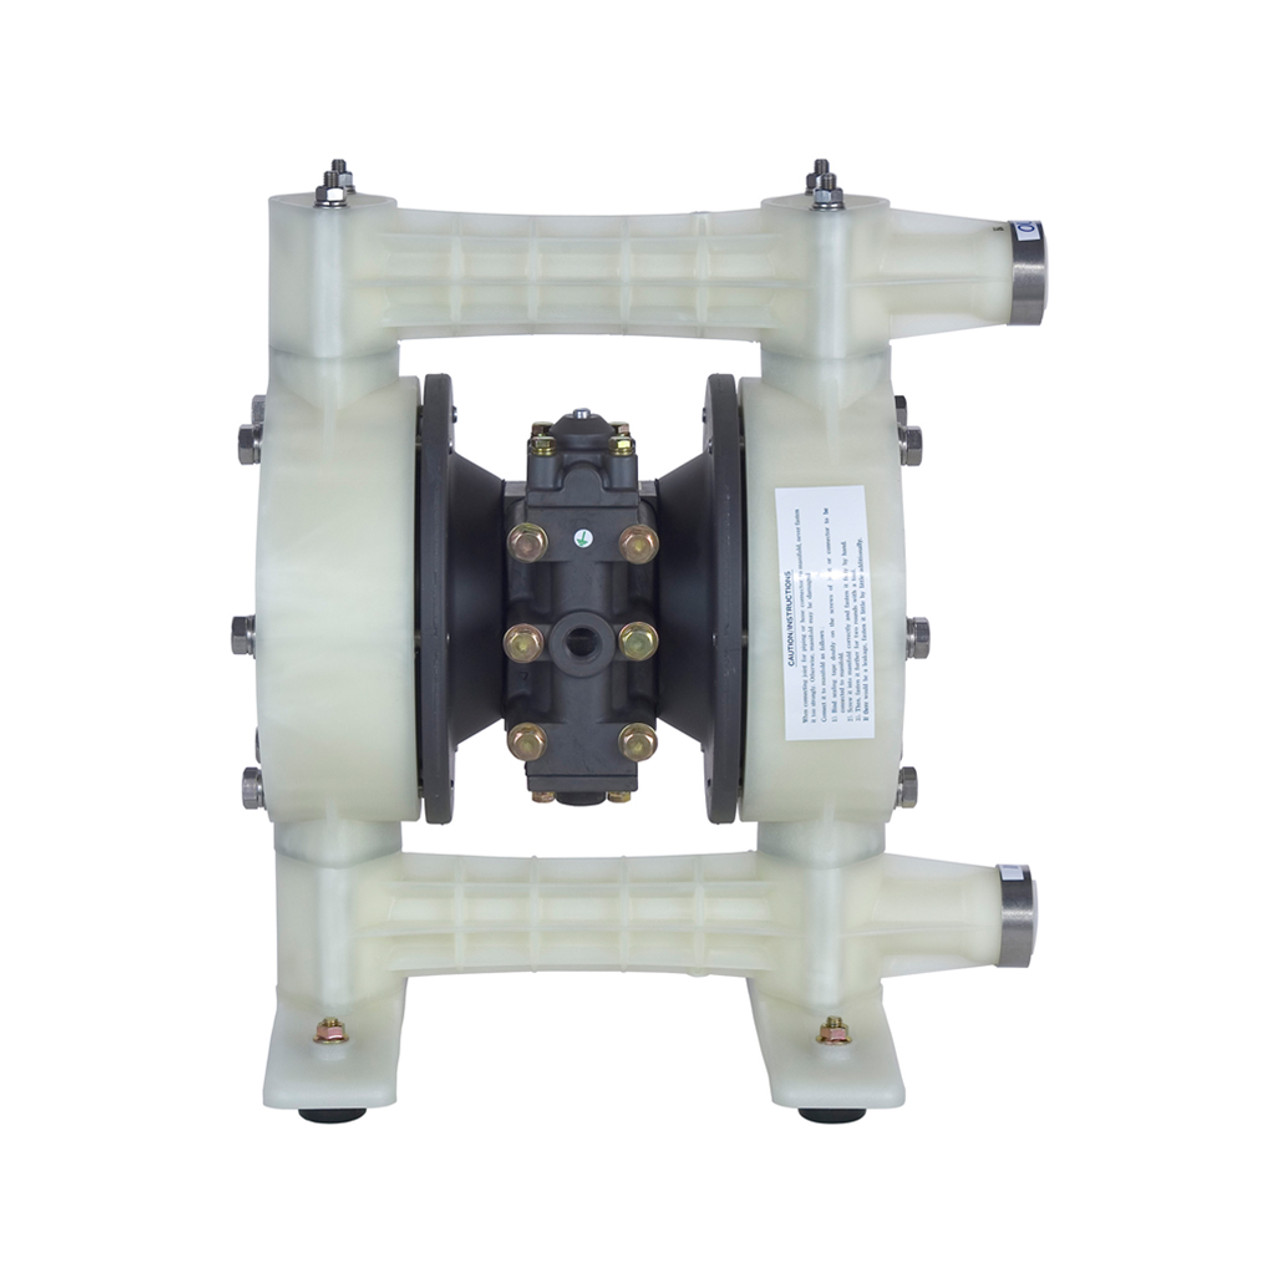 Yamada NDP-25BPT-PP Air Operated Double Diaphragm Pump - 1" NPT with Polypropylene Body and